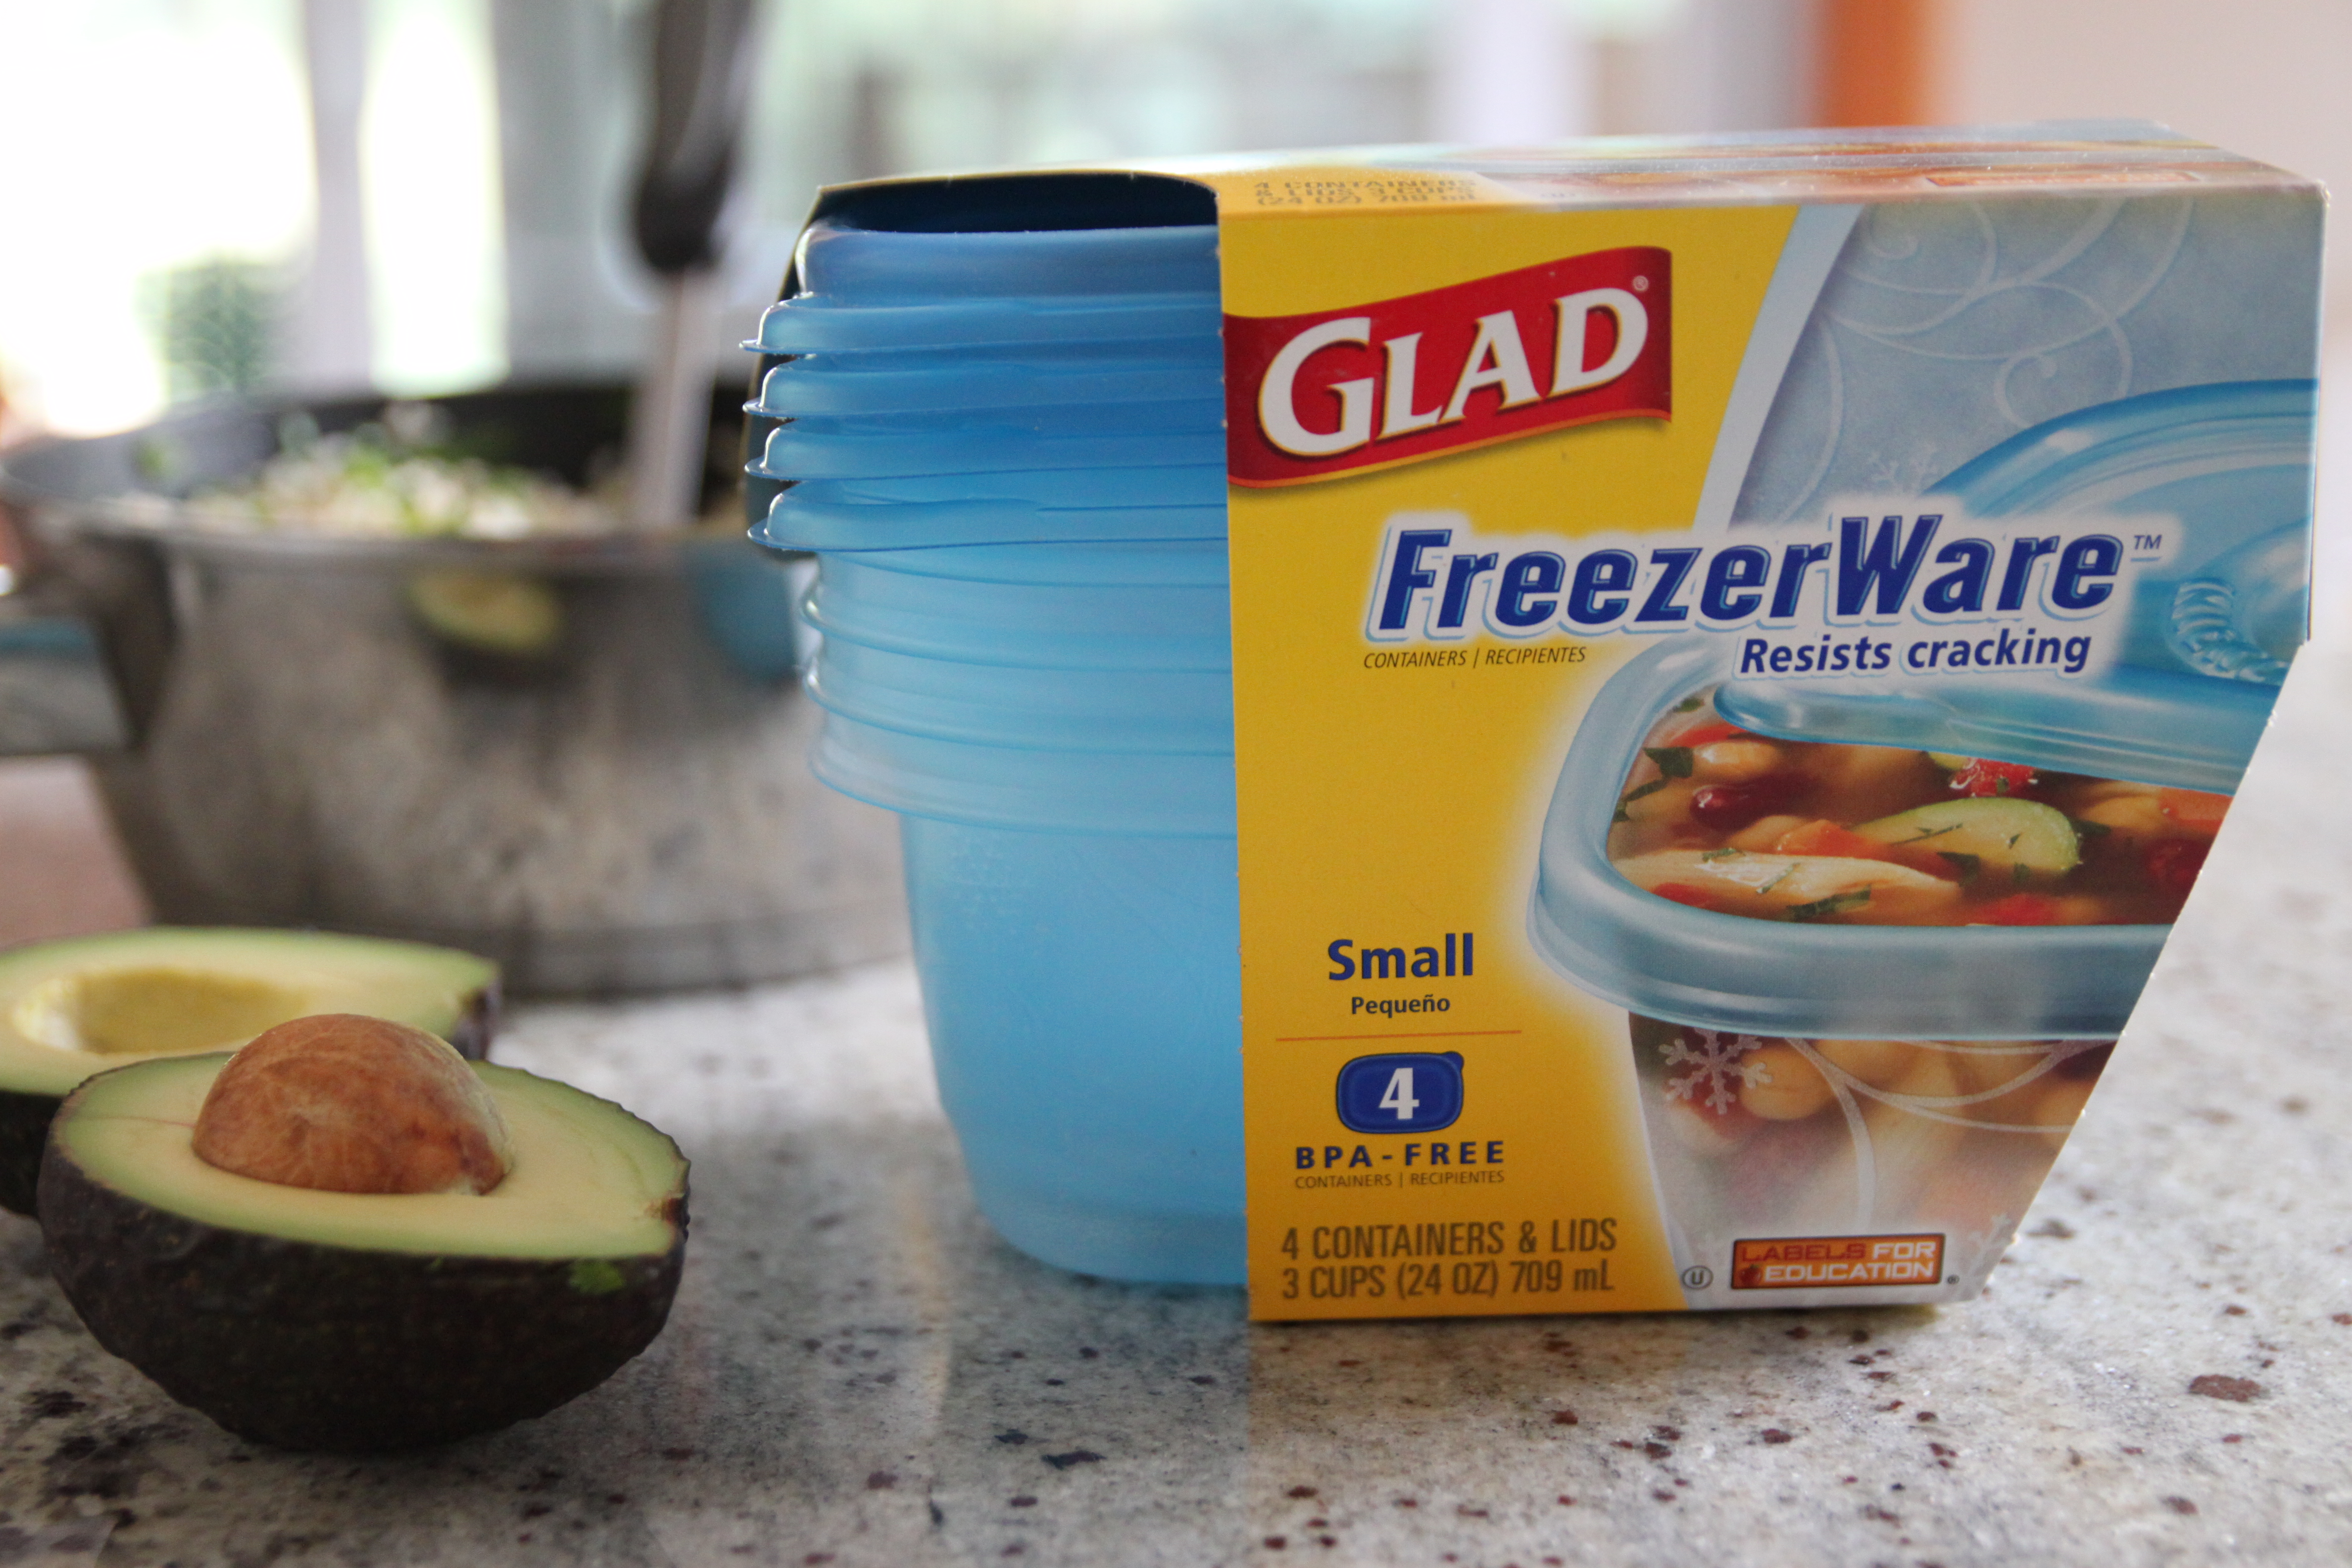 Glad Freezer Ware Containers, Large